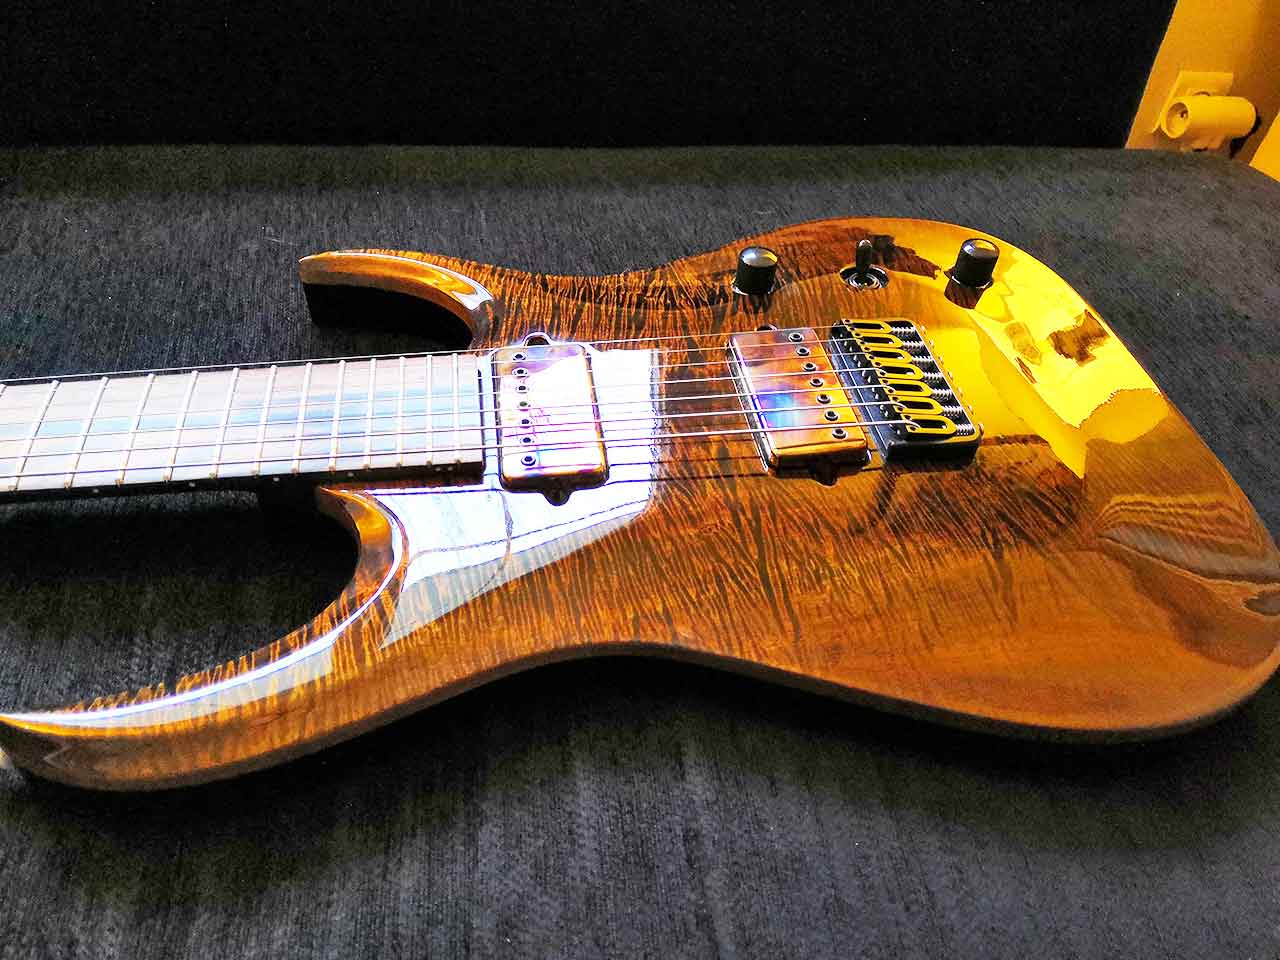 Mad Guitars joined Luthiers.com